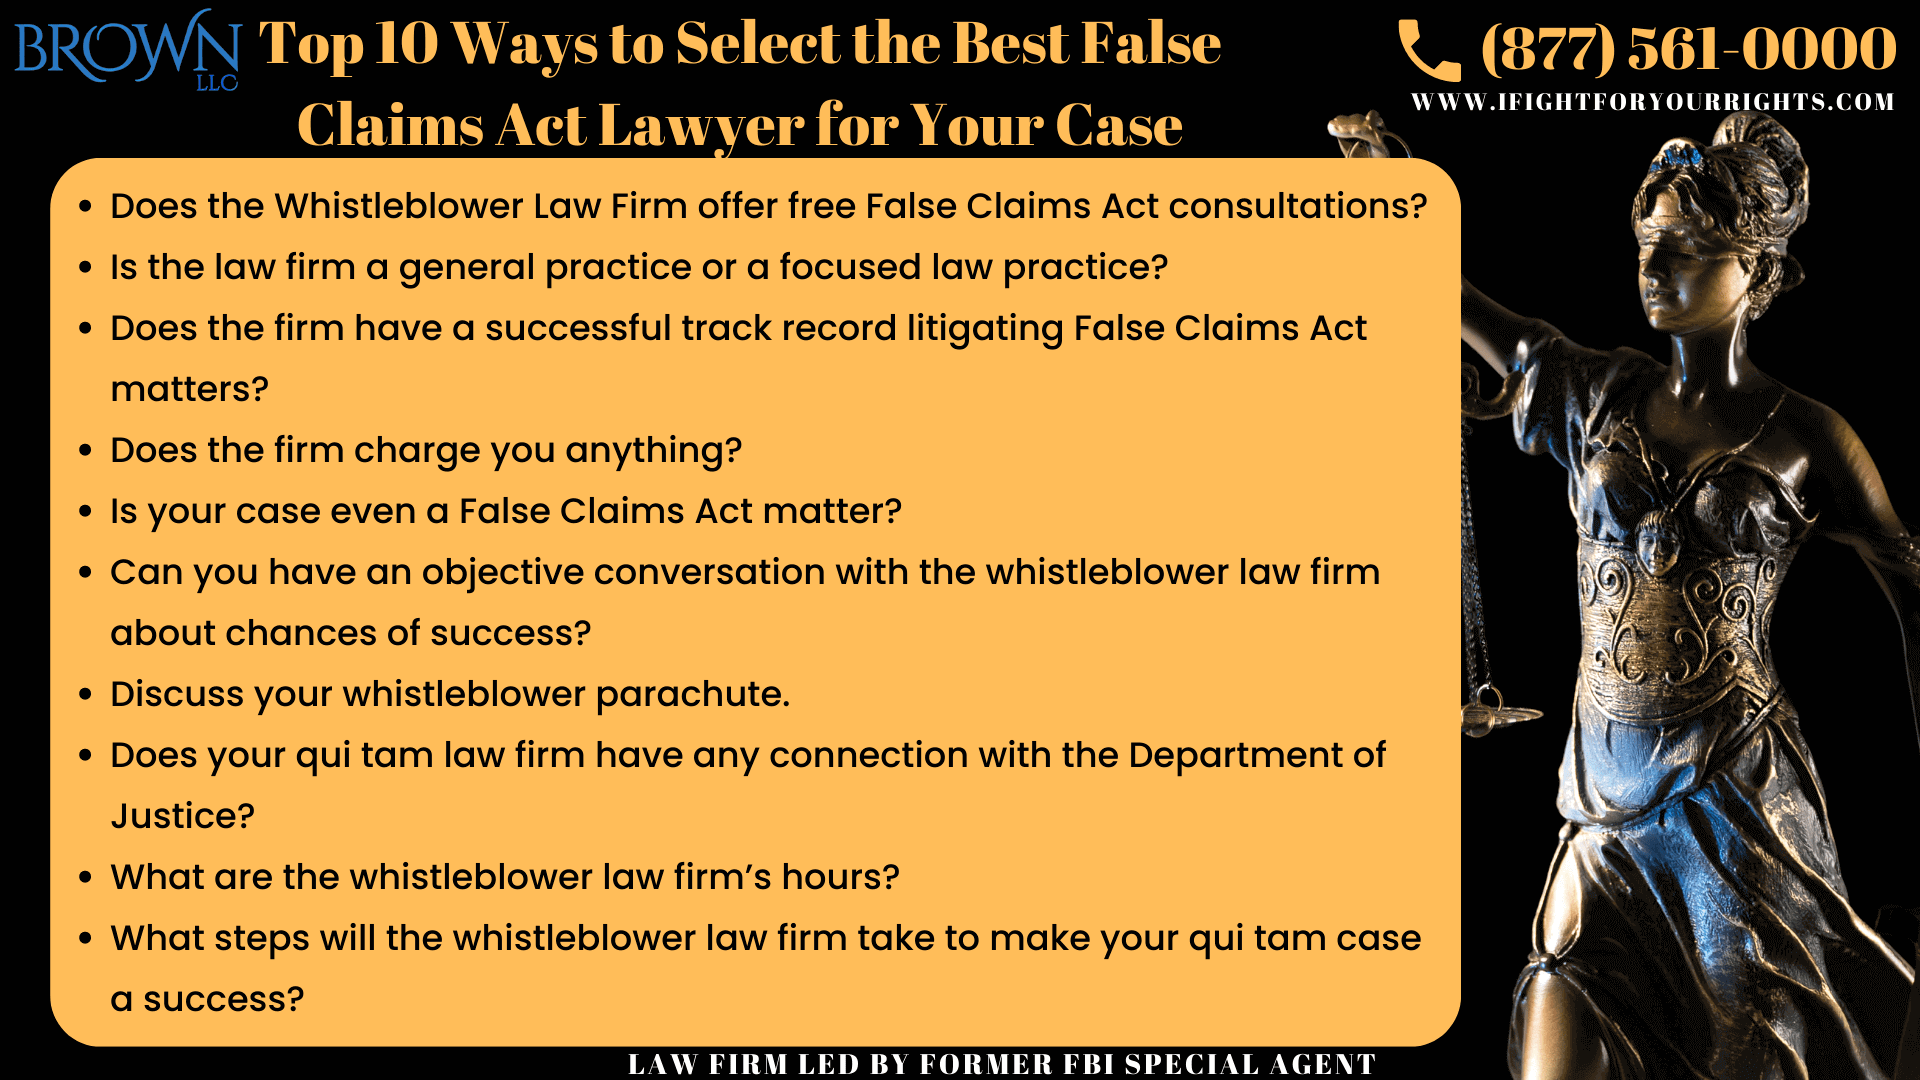 Top 10 Ways to Select the Best False Claims Act Lawyer for Your Case